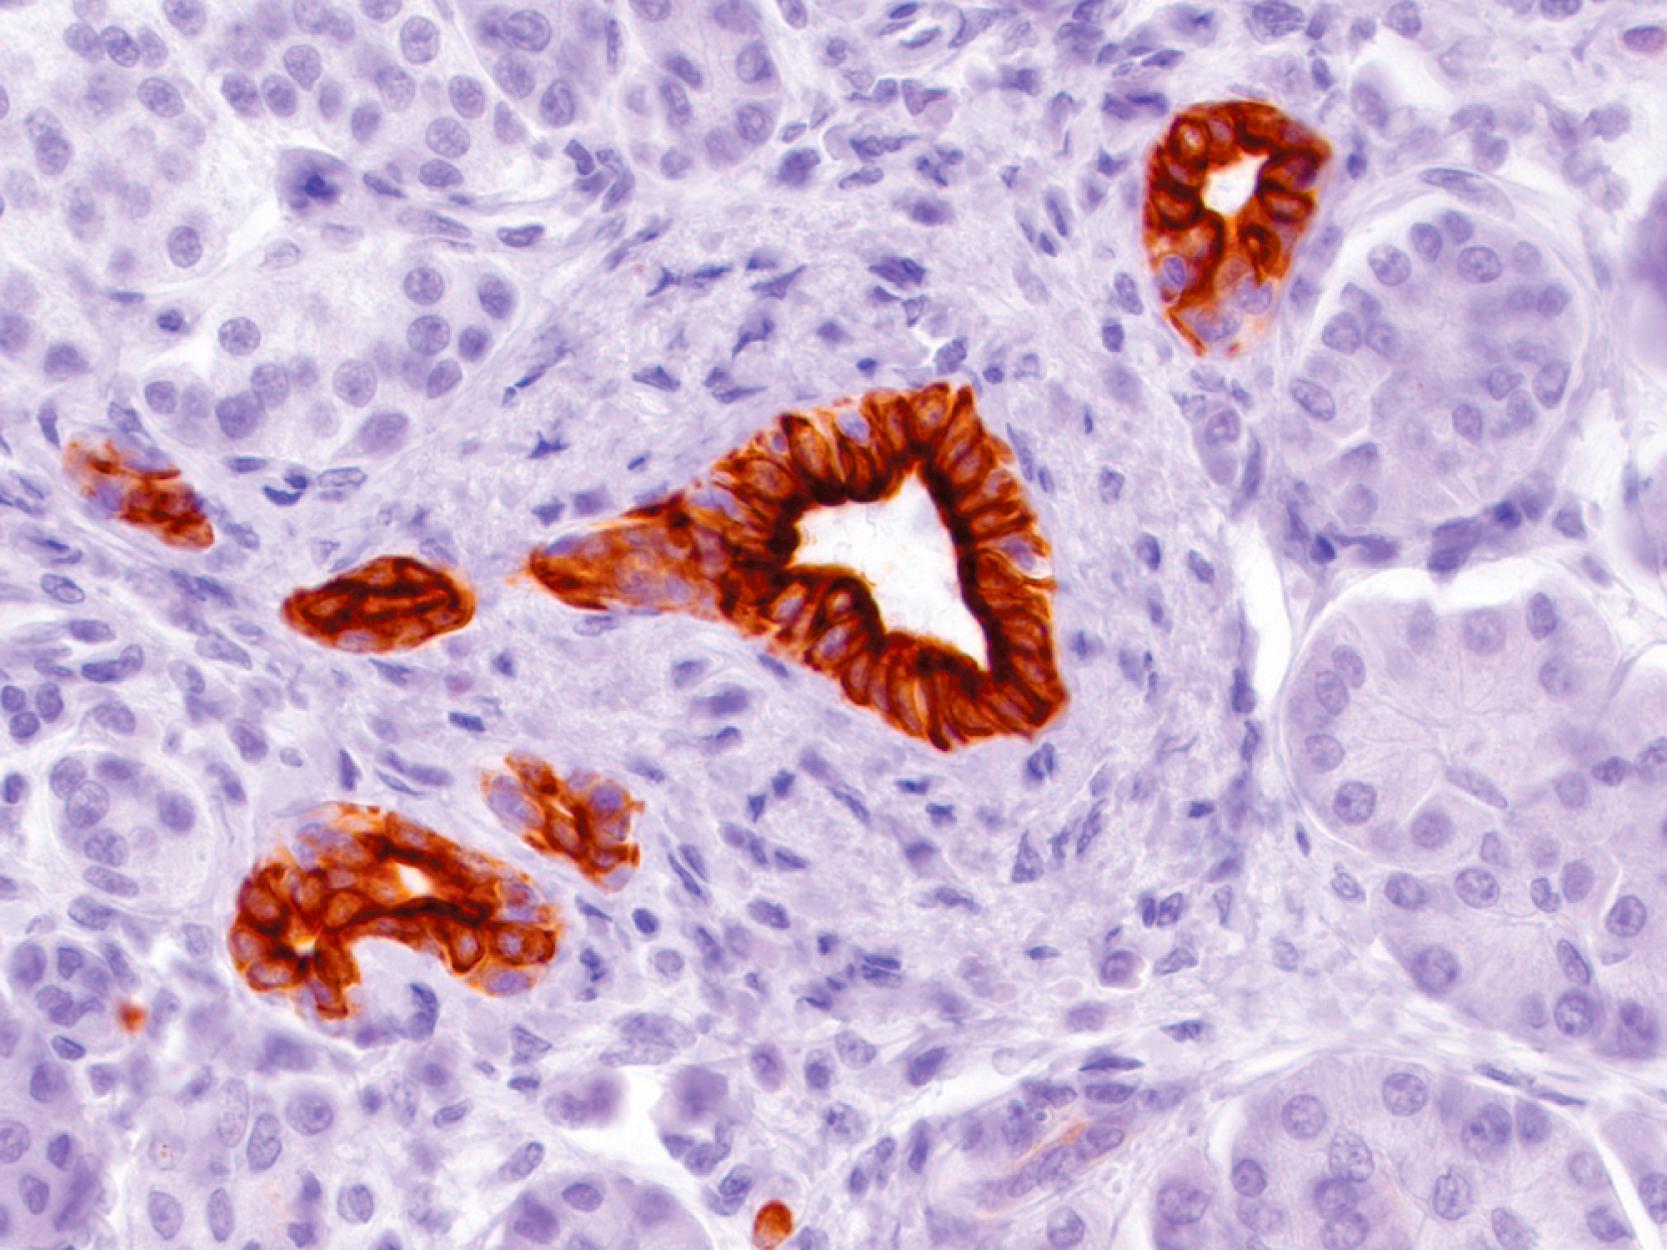 Fig. 15.1, Pancreatic ductal cells are strongly positive for cytokeratin 7, whereas acinar cells generally do not label with this marker.